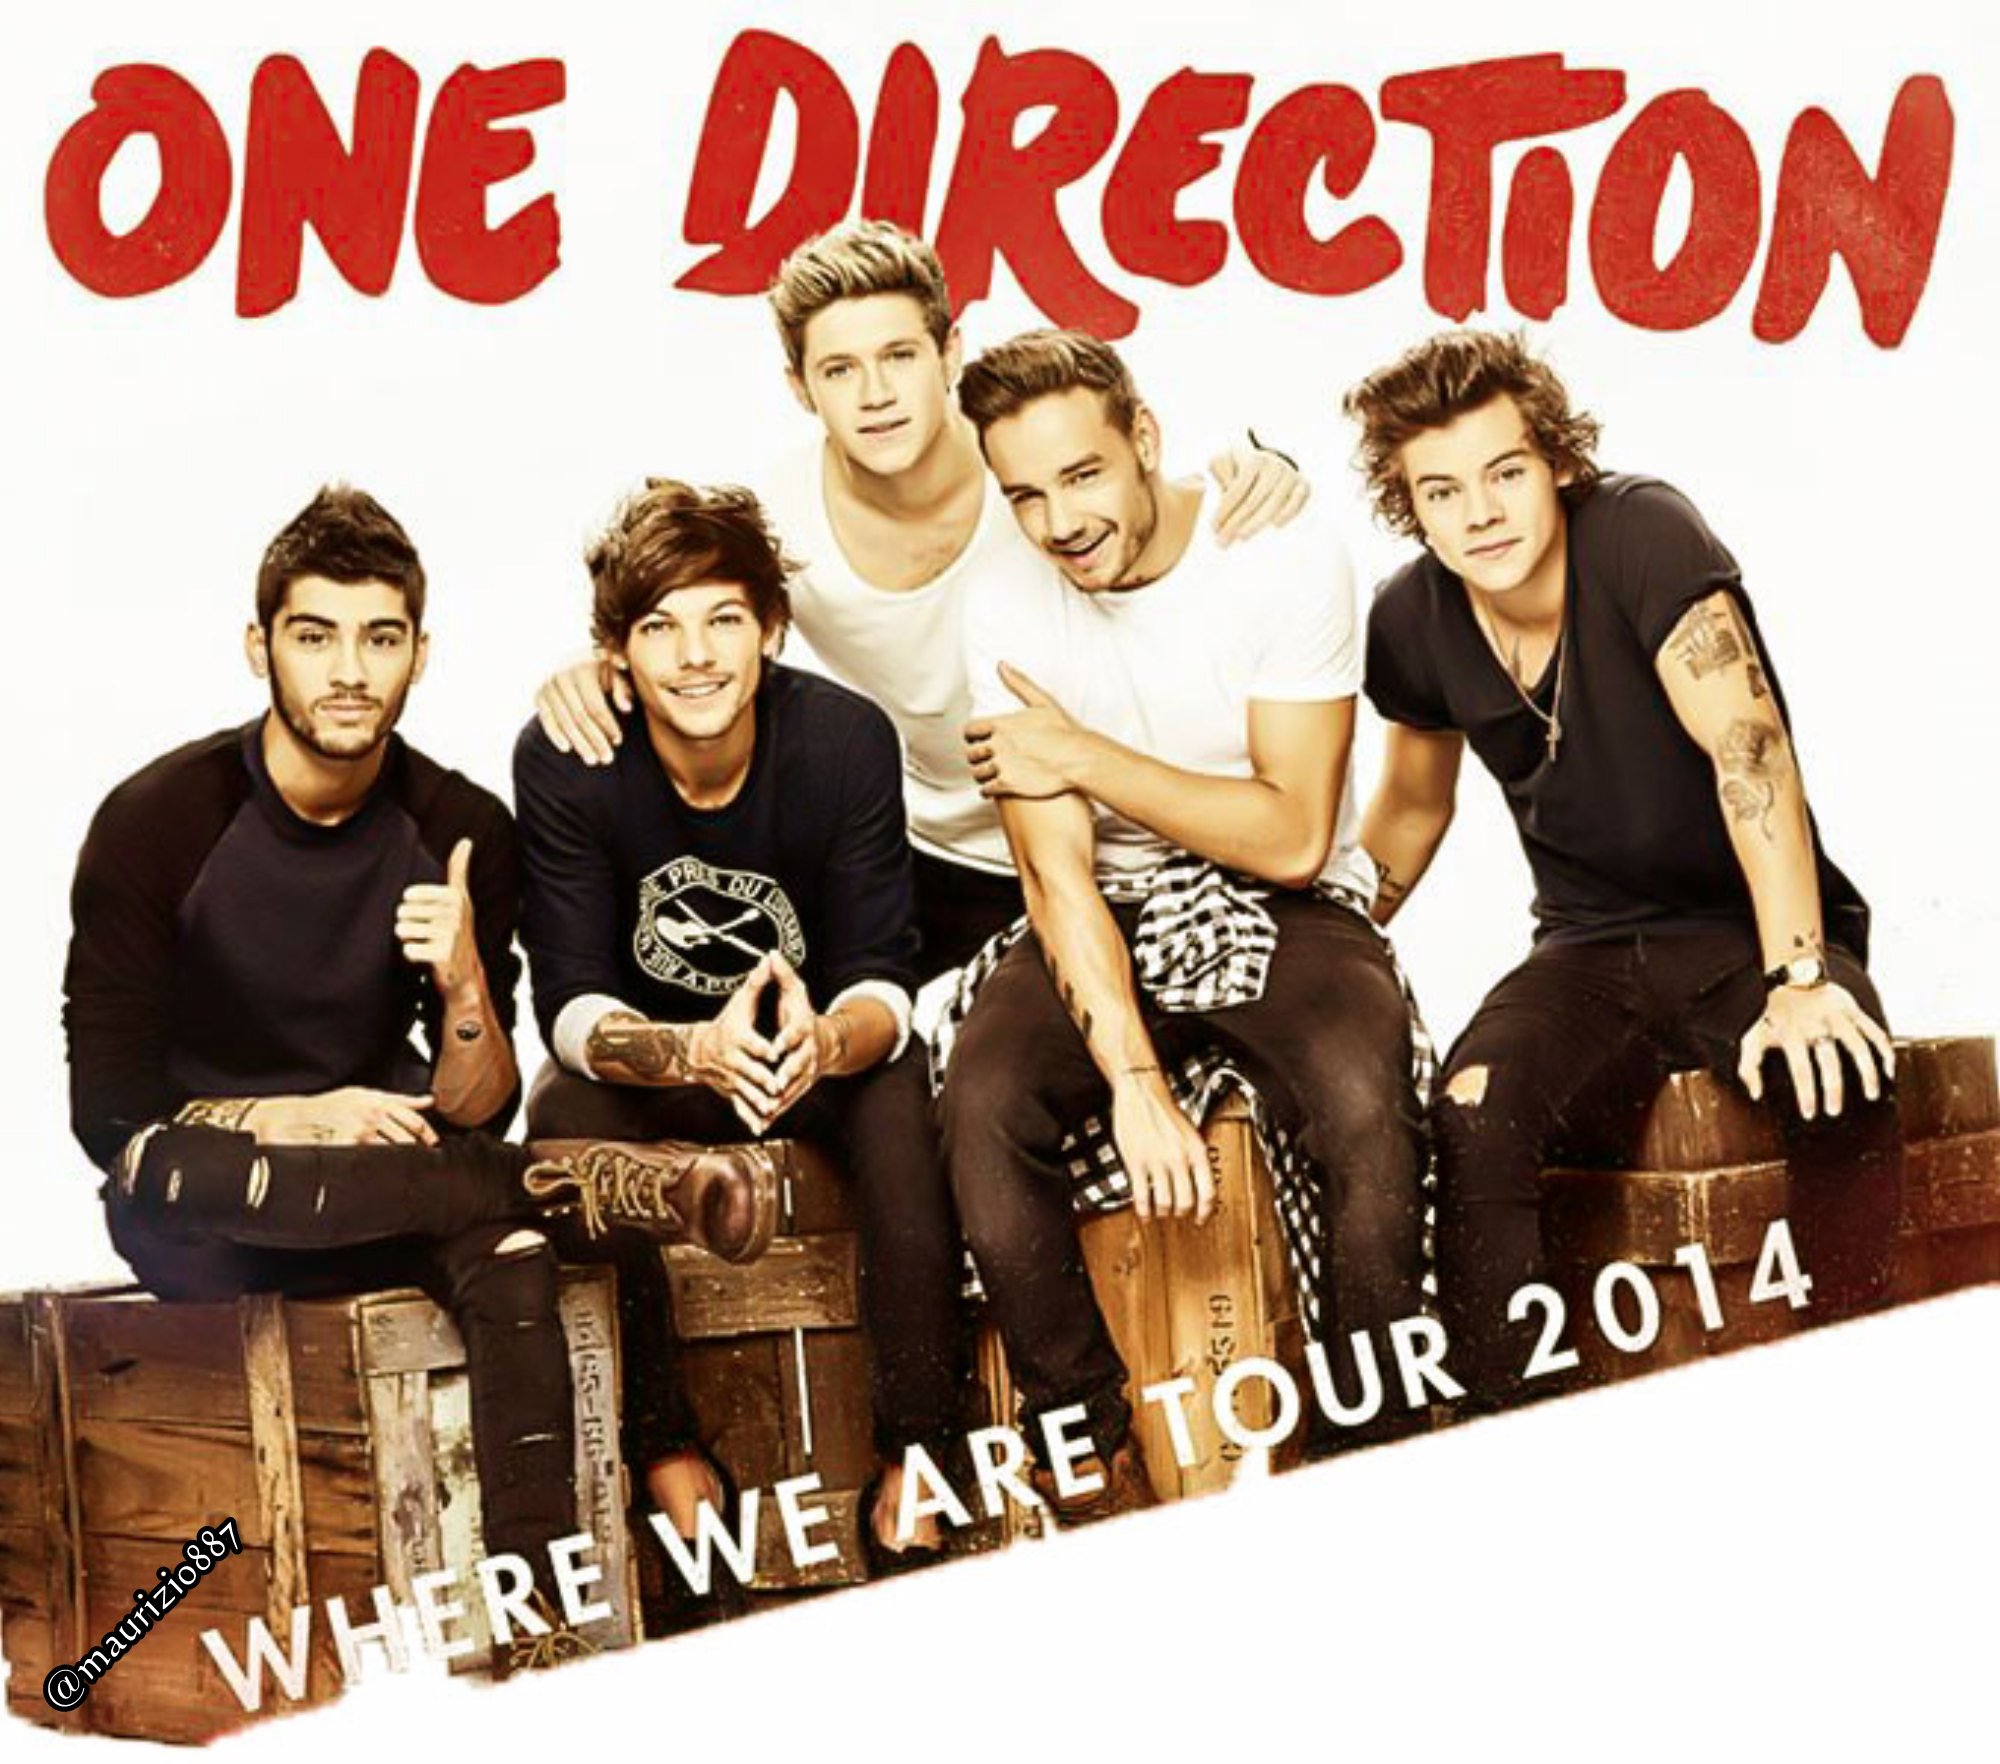 Where We Are Tour 2014 - Programme - One Direction Photo 